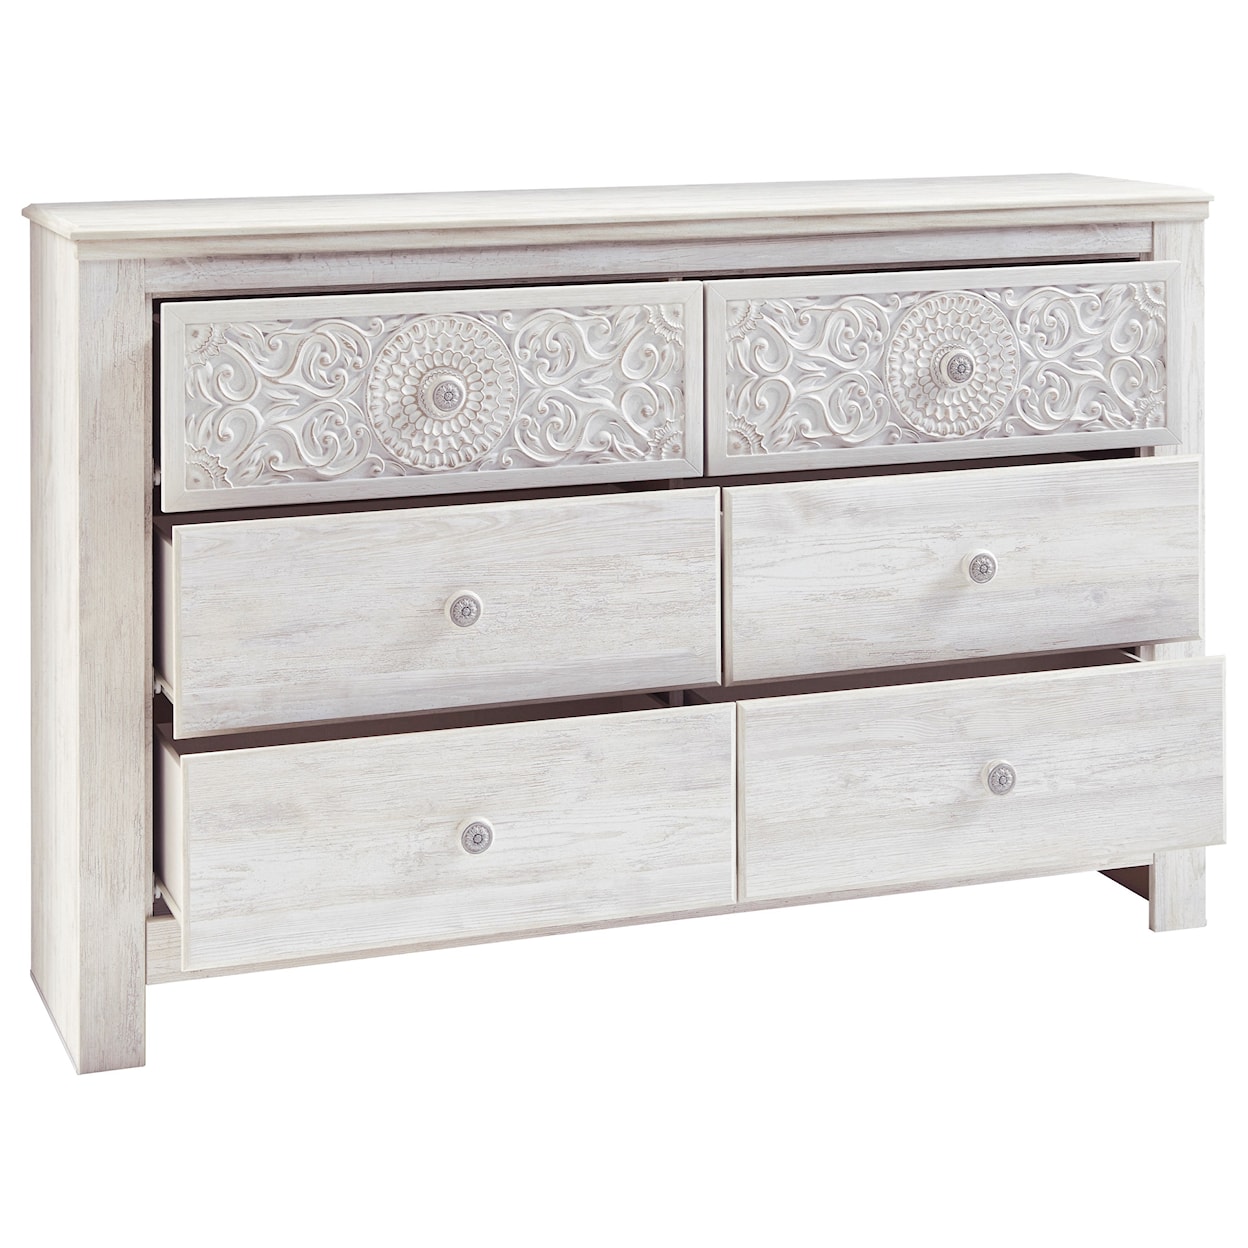 Signature Design by Ashley Paxberry Dresser